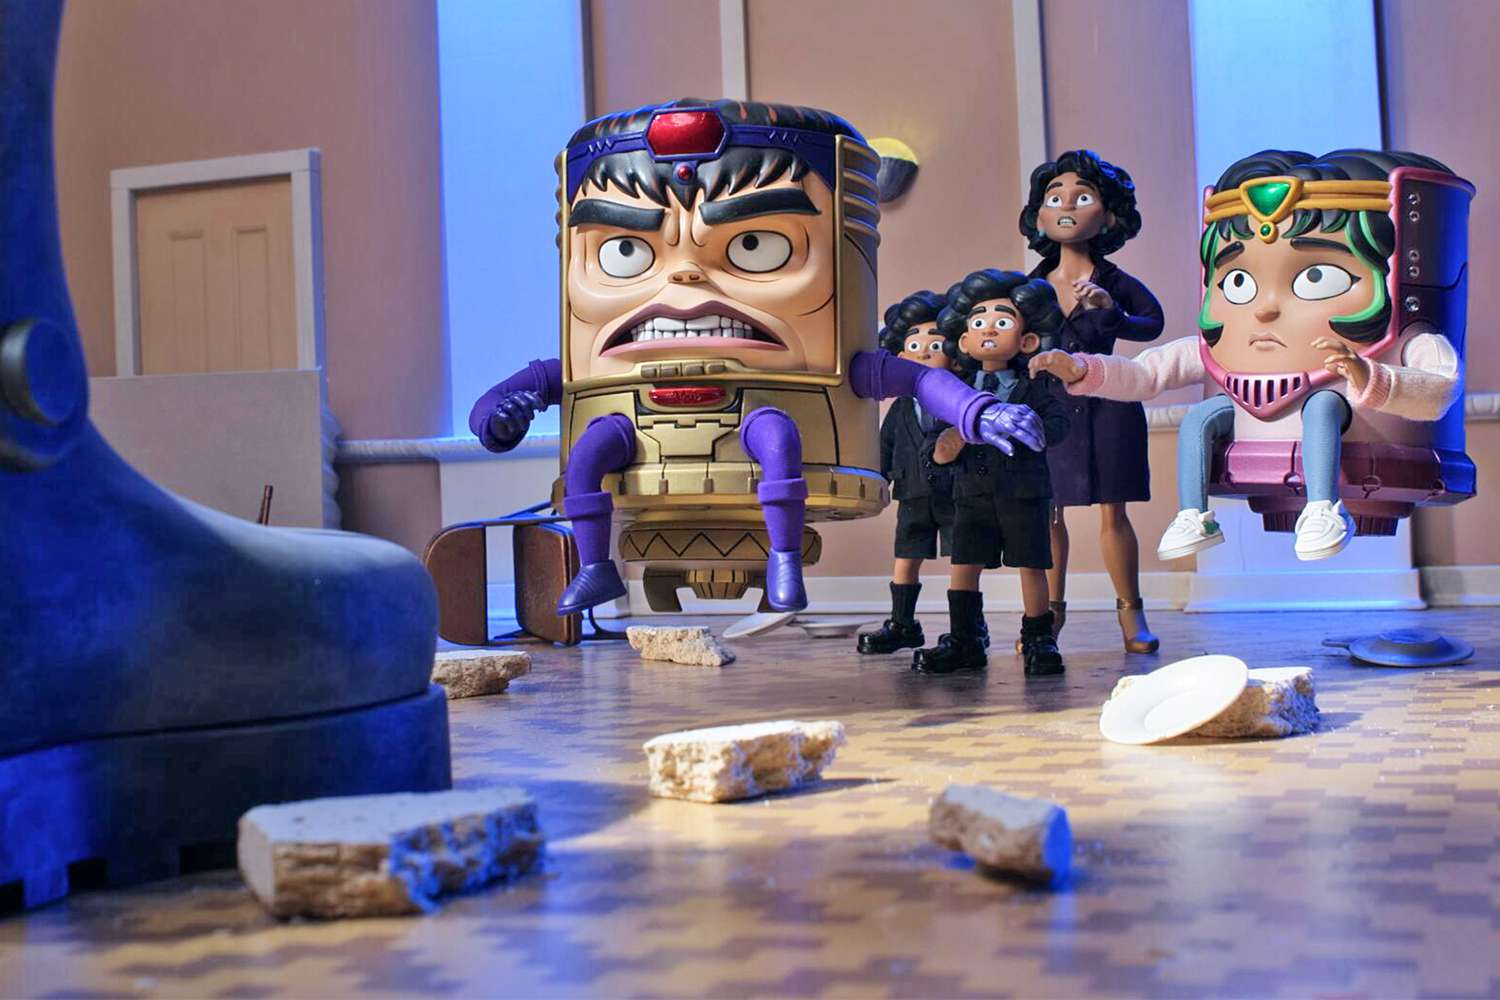 M.O.D.O.K -- "DAYS OF FUTURE M.O.D.O.K.S" - Episode 110 -- The family reunites for Lou’s Bar-Mitzvah but the surprise return of a villain threatens M.O.D.O.K.’s past, present and future in the show’s season finale. (Photo Courtesy of Marvel)